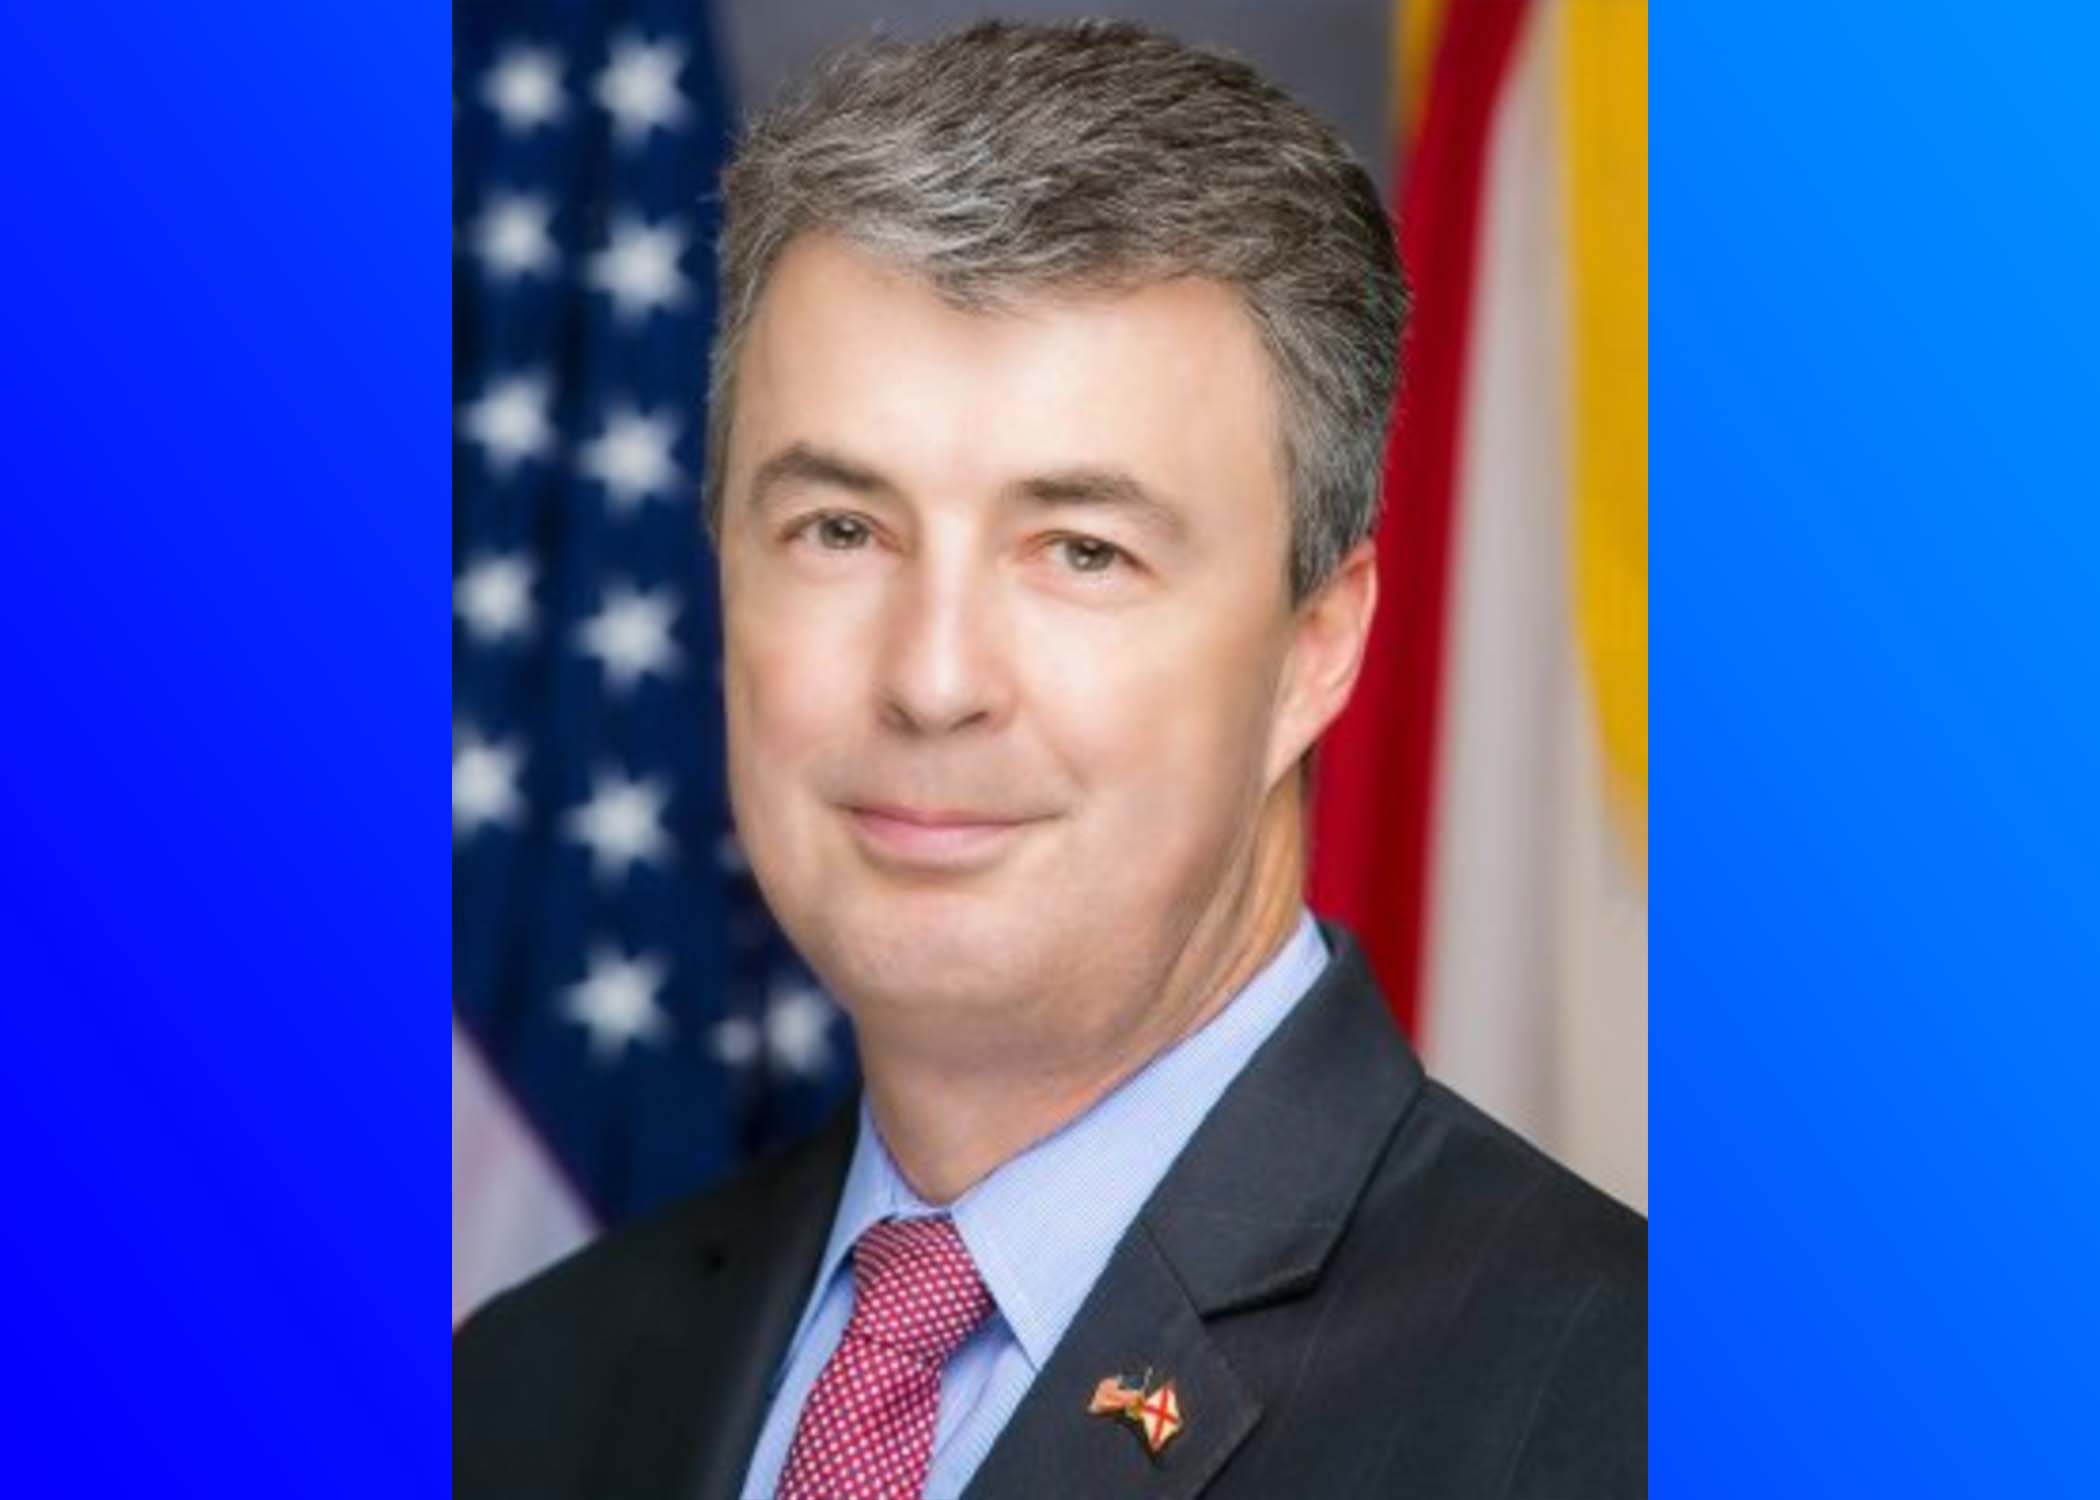 Video interview with Attorney General Steve Marshall